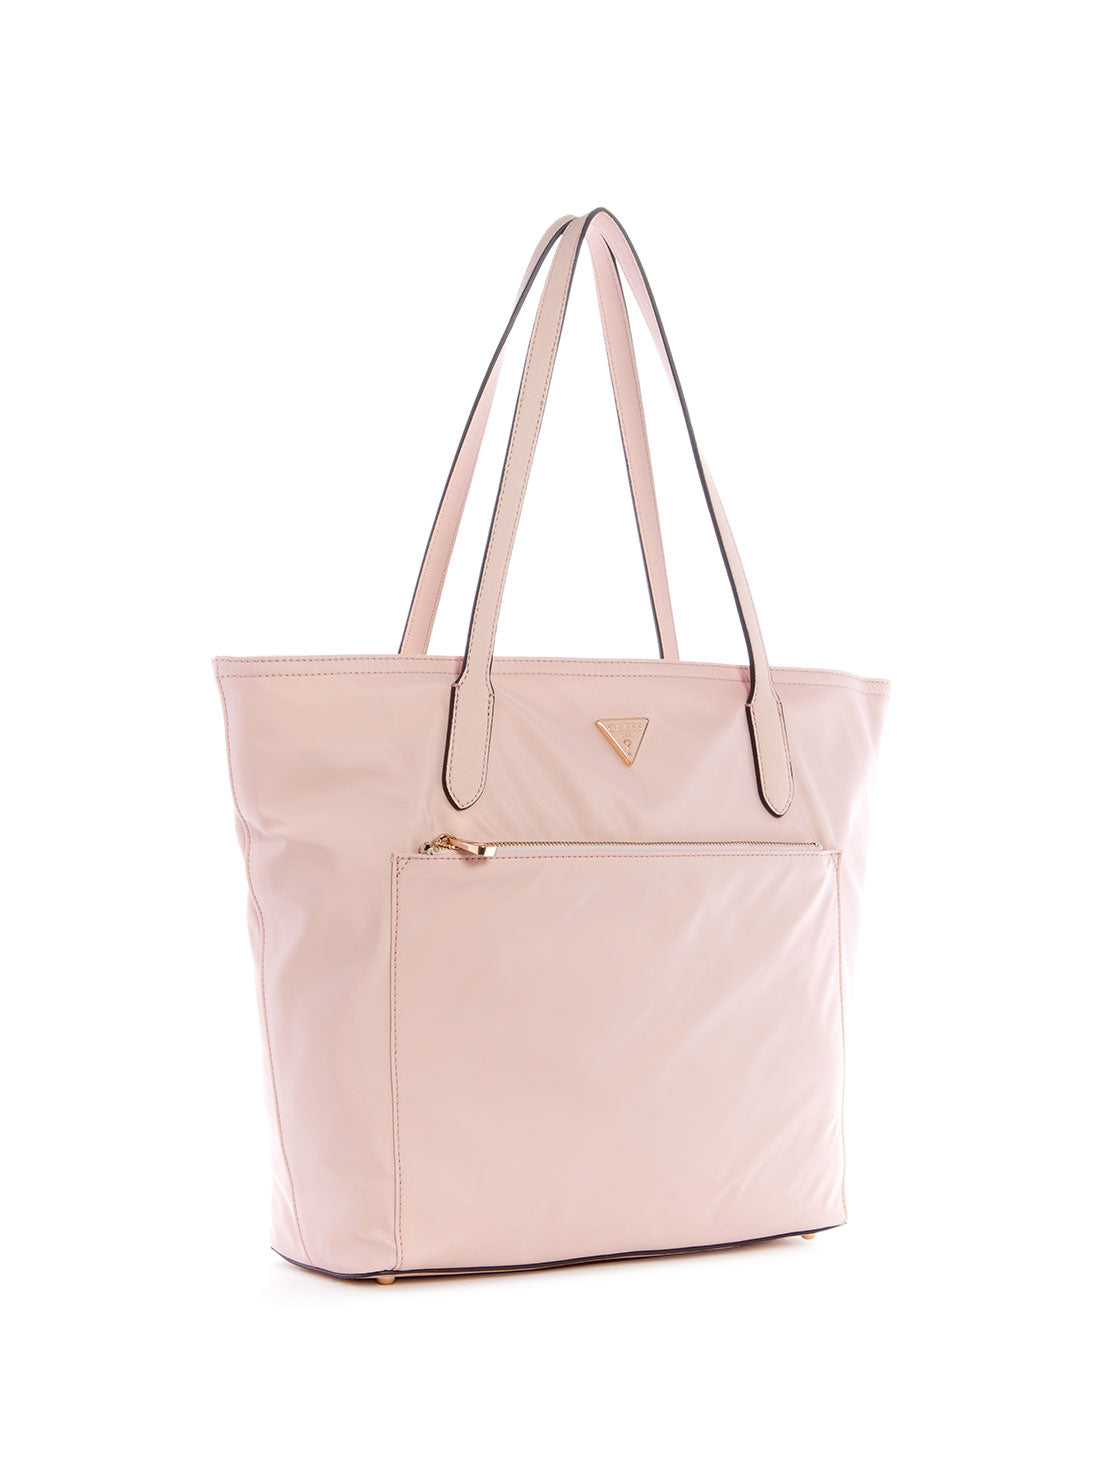 GUESS Women's Eco Pink Gemma Tote Bag EYG839523 Front Side View